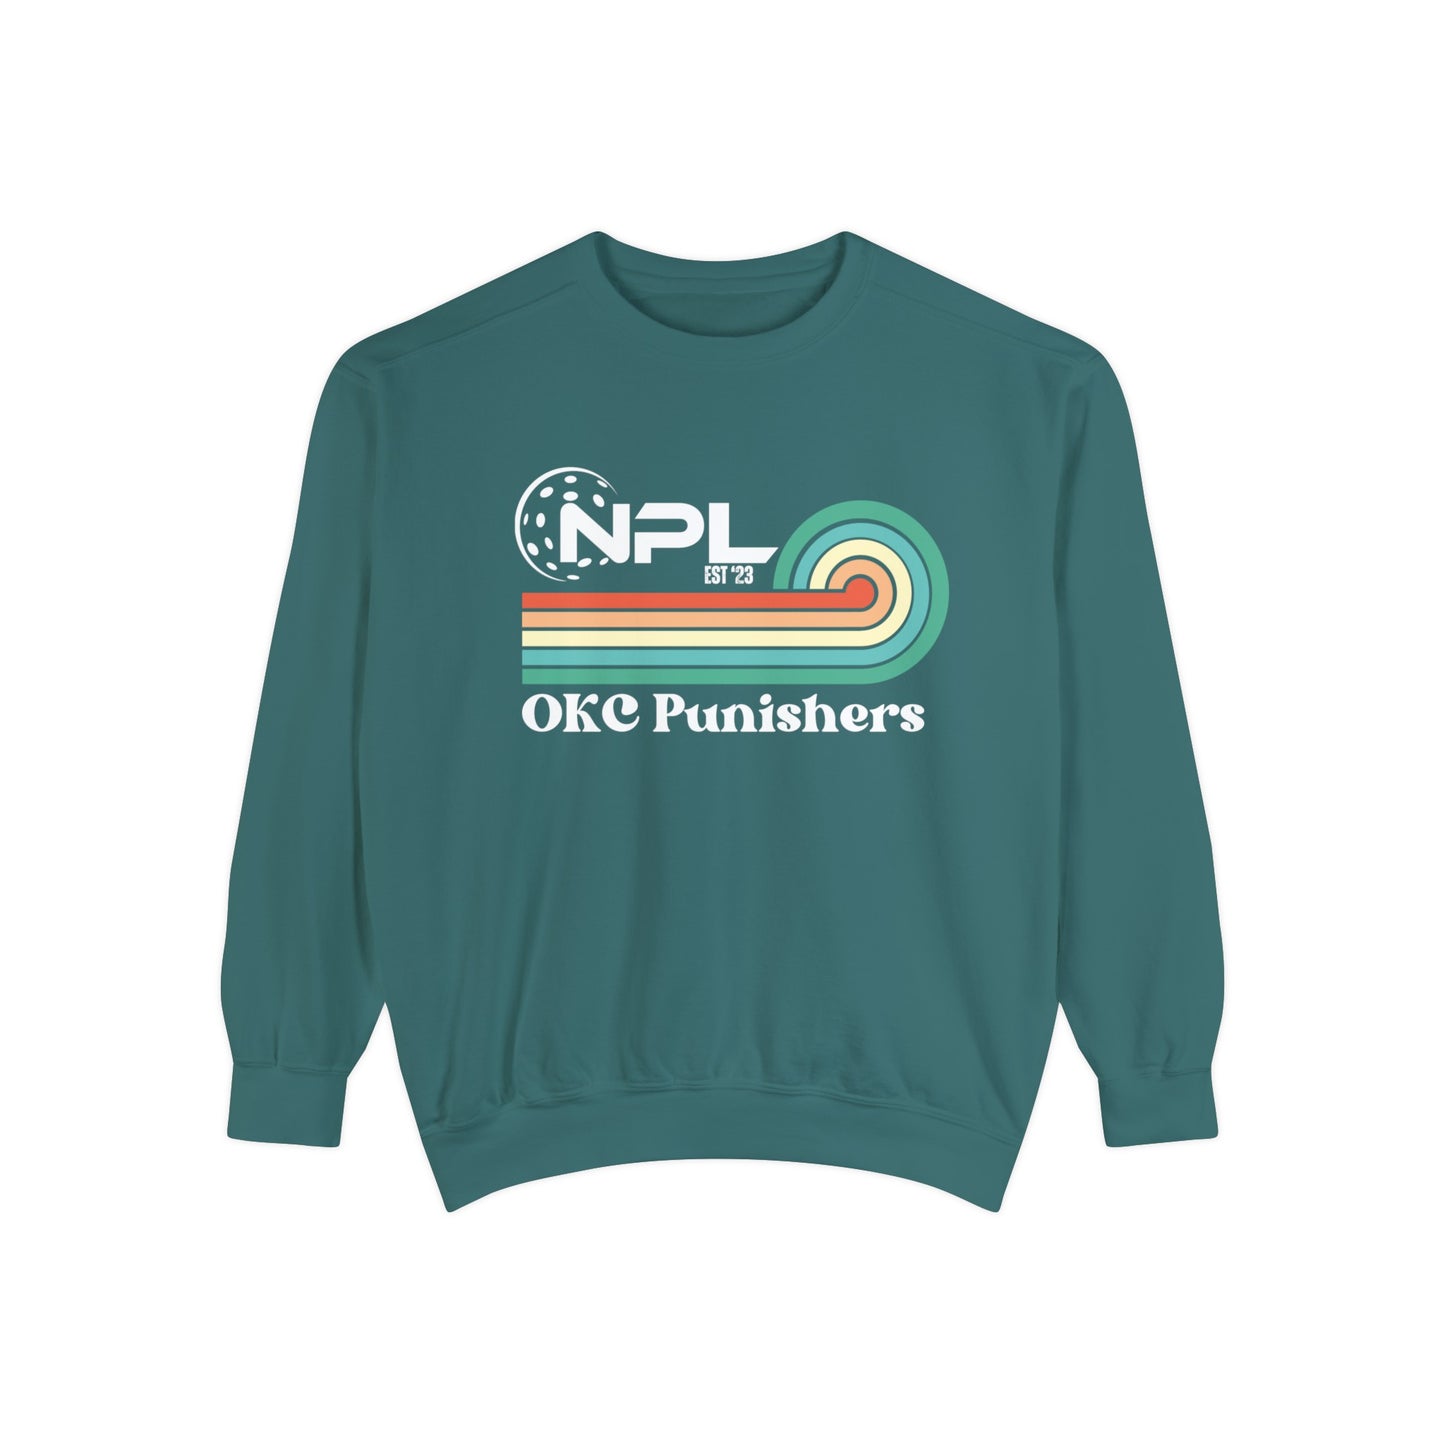 NPL Retro Crew OKC Punishers - can add your name to back or team name